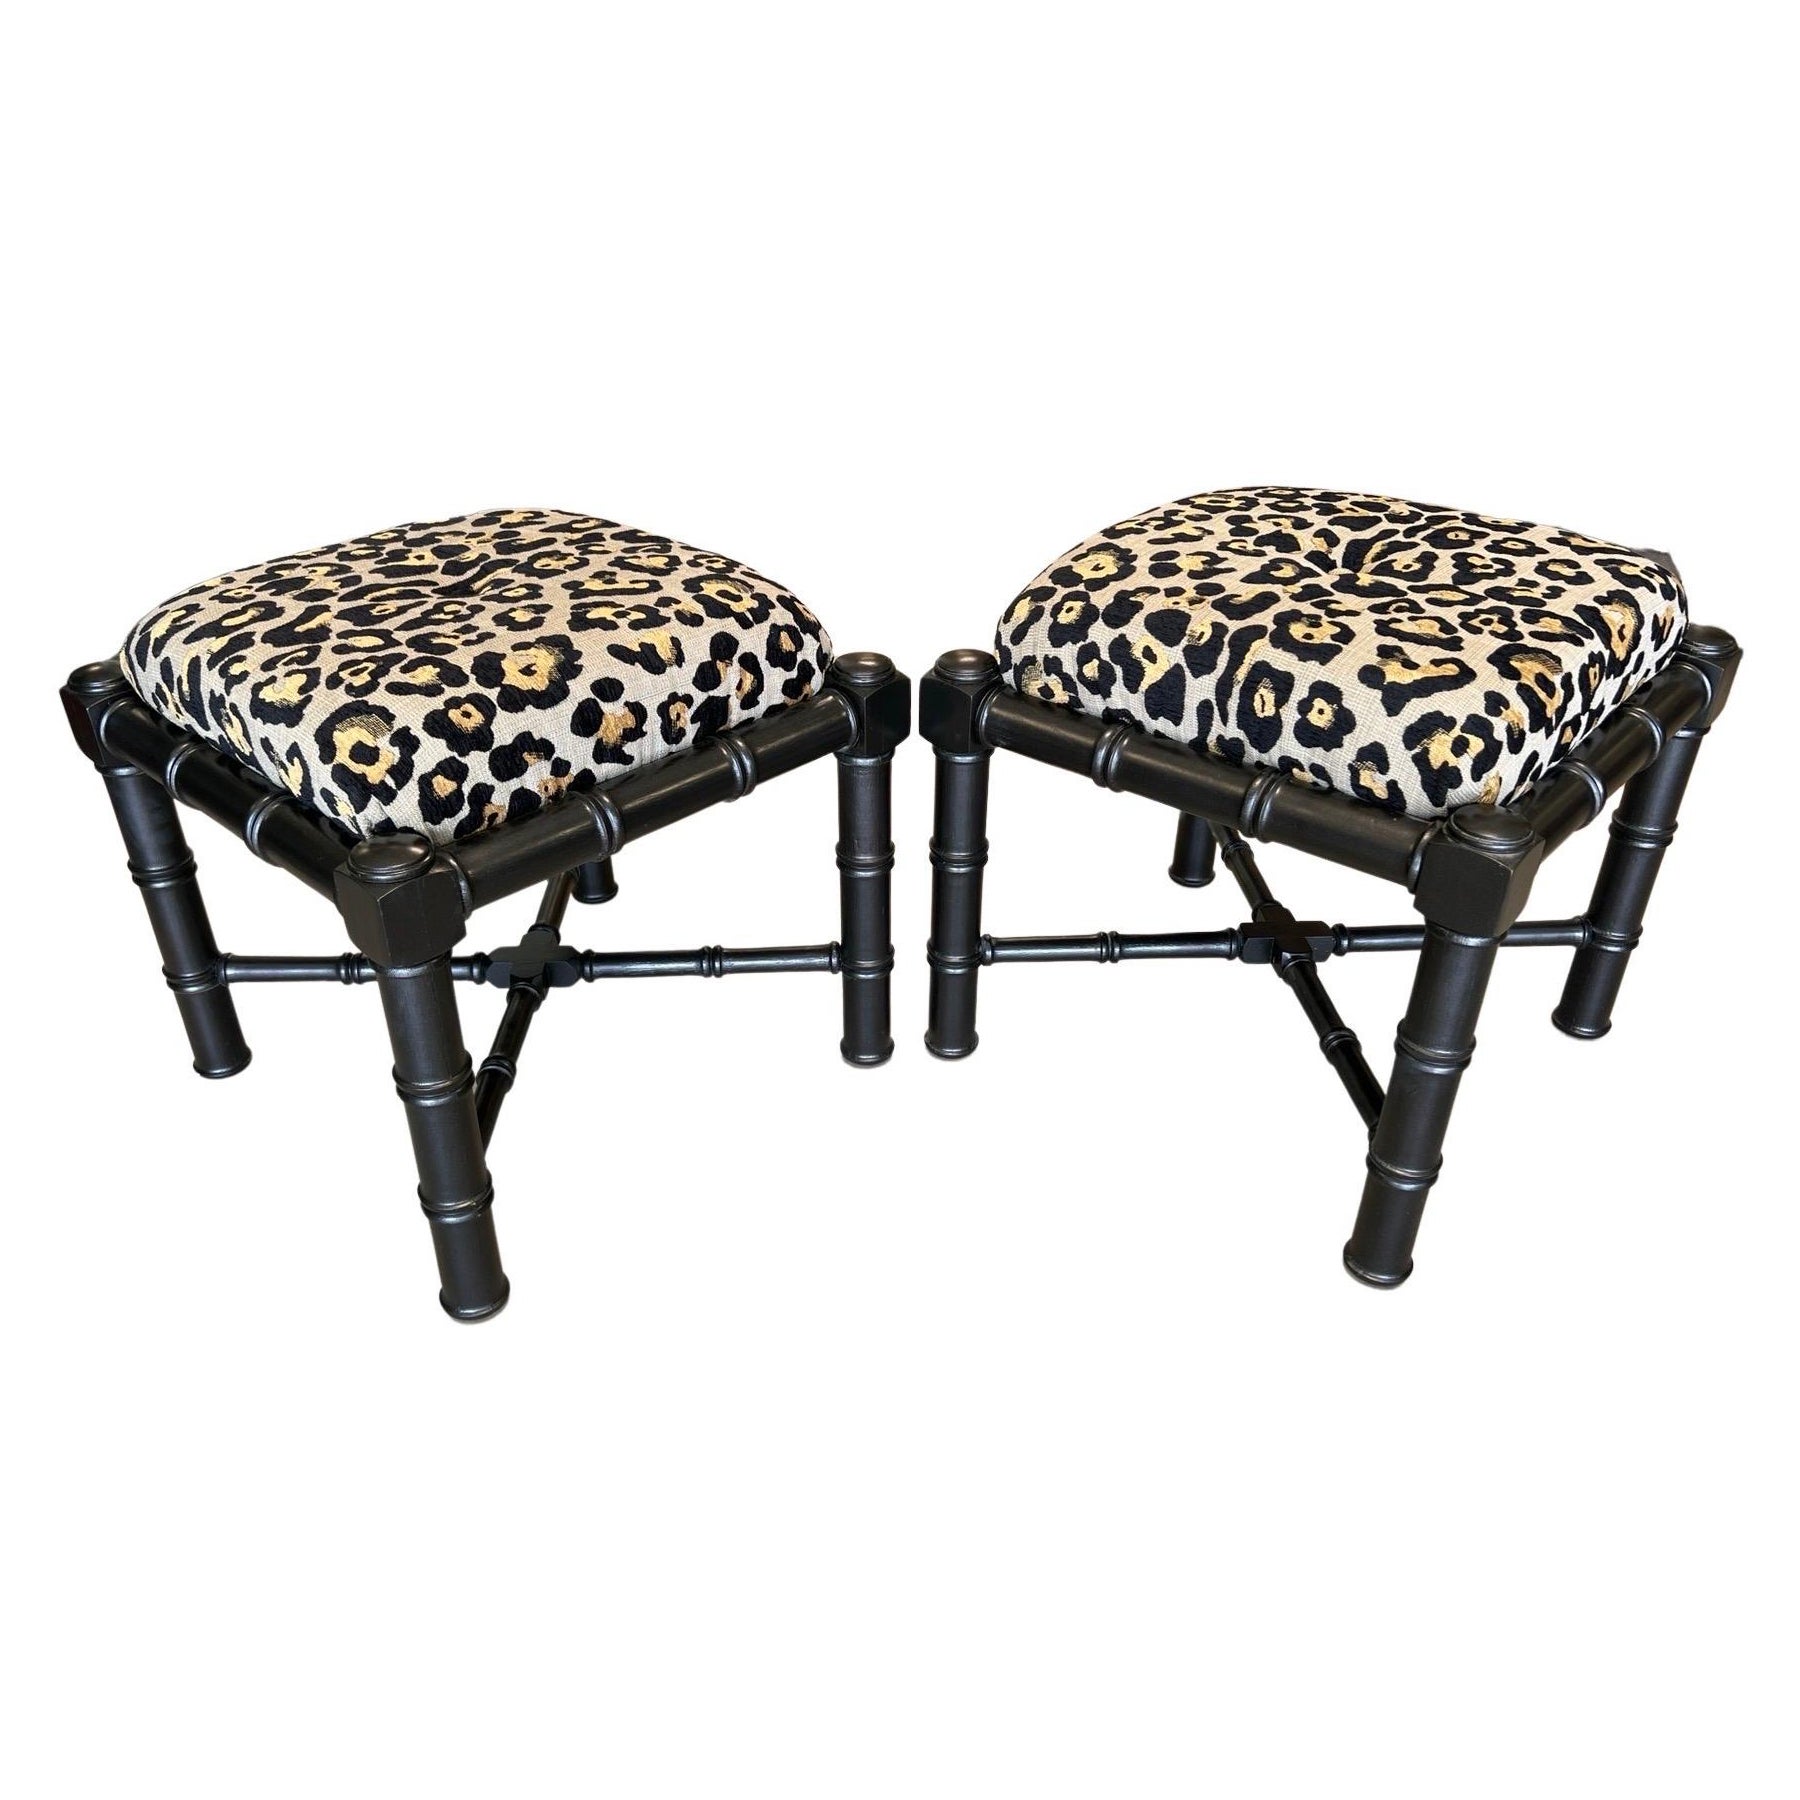 Pair, Ebonized Faux Bamboo Stools with Leopard Fabric Upholstery